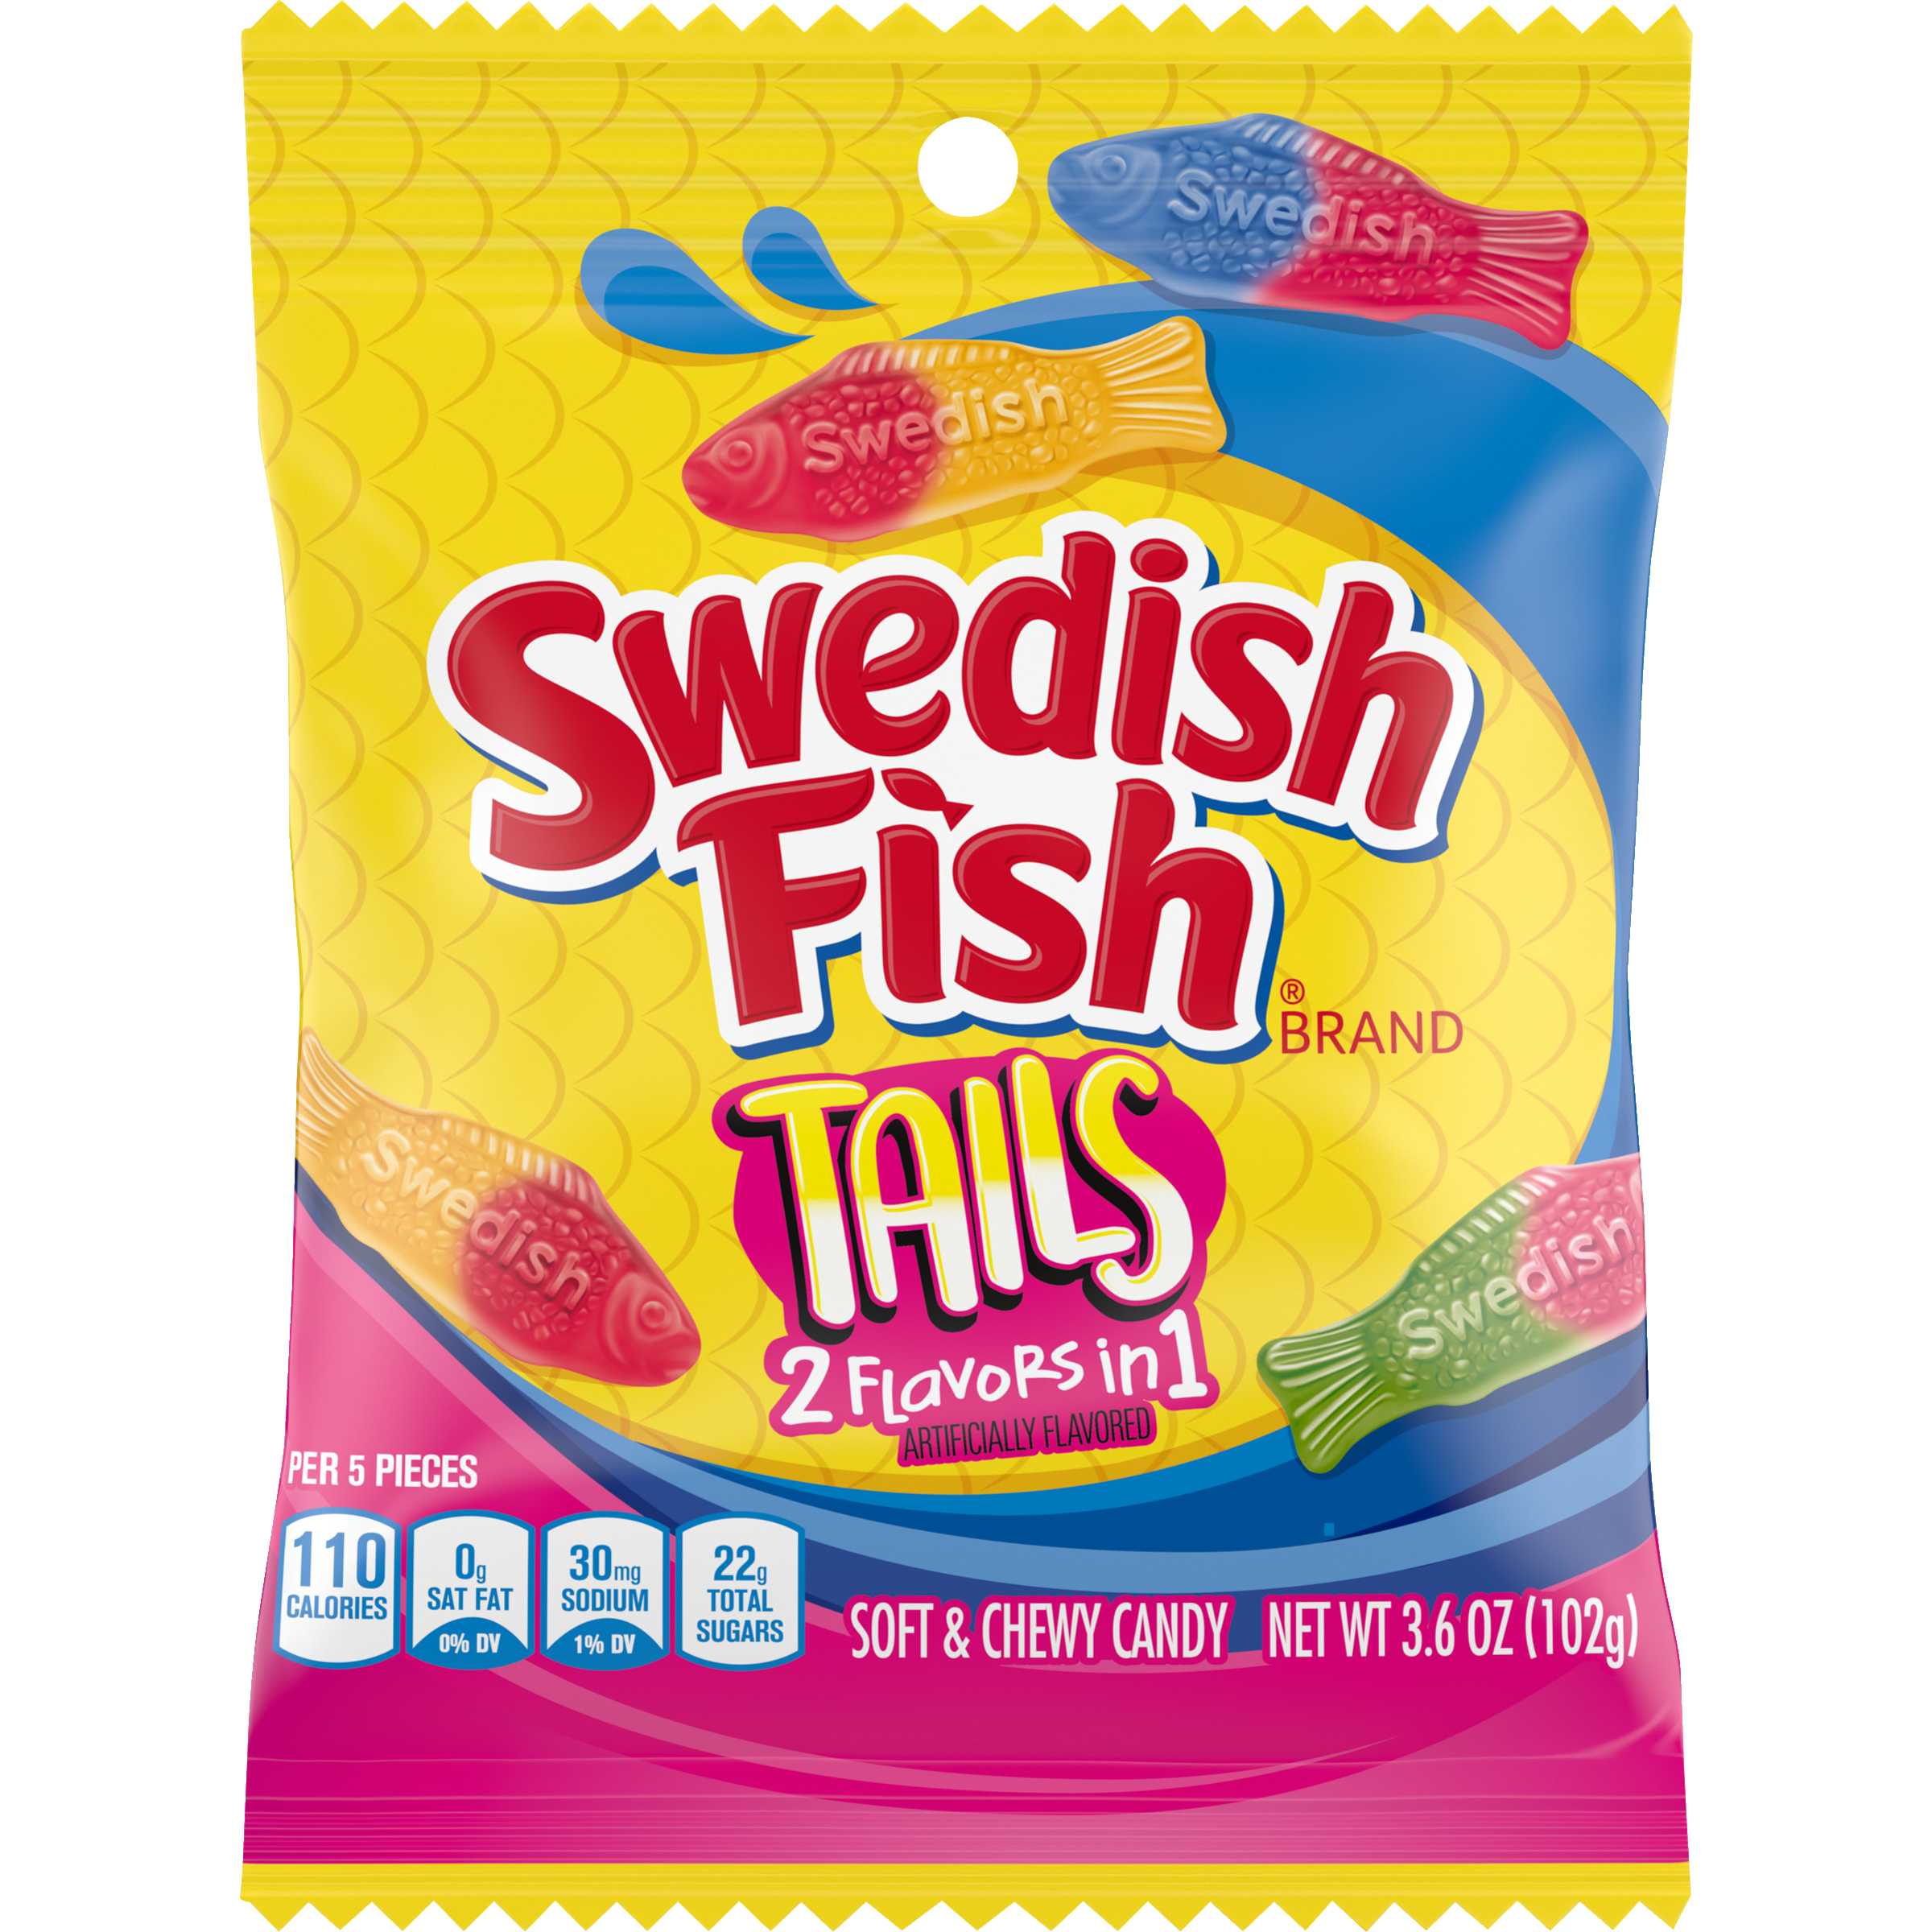 SWEDISH FISH Tails 2 Flavors in 1 Soft & Chewy Candy, 3.6 oz-1